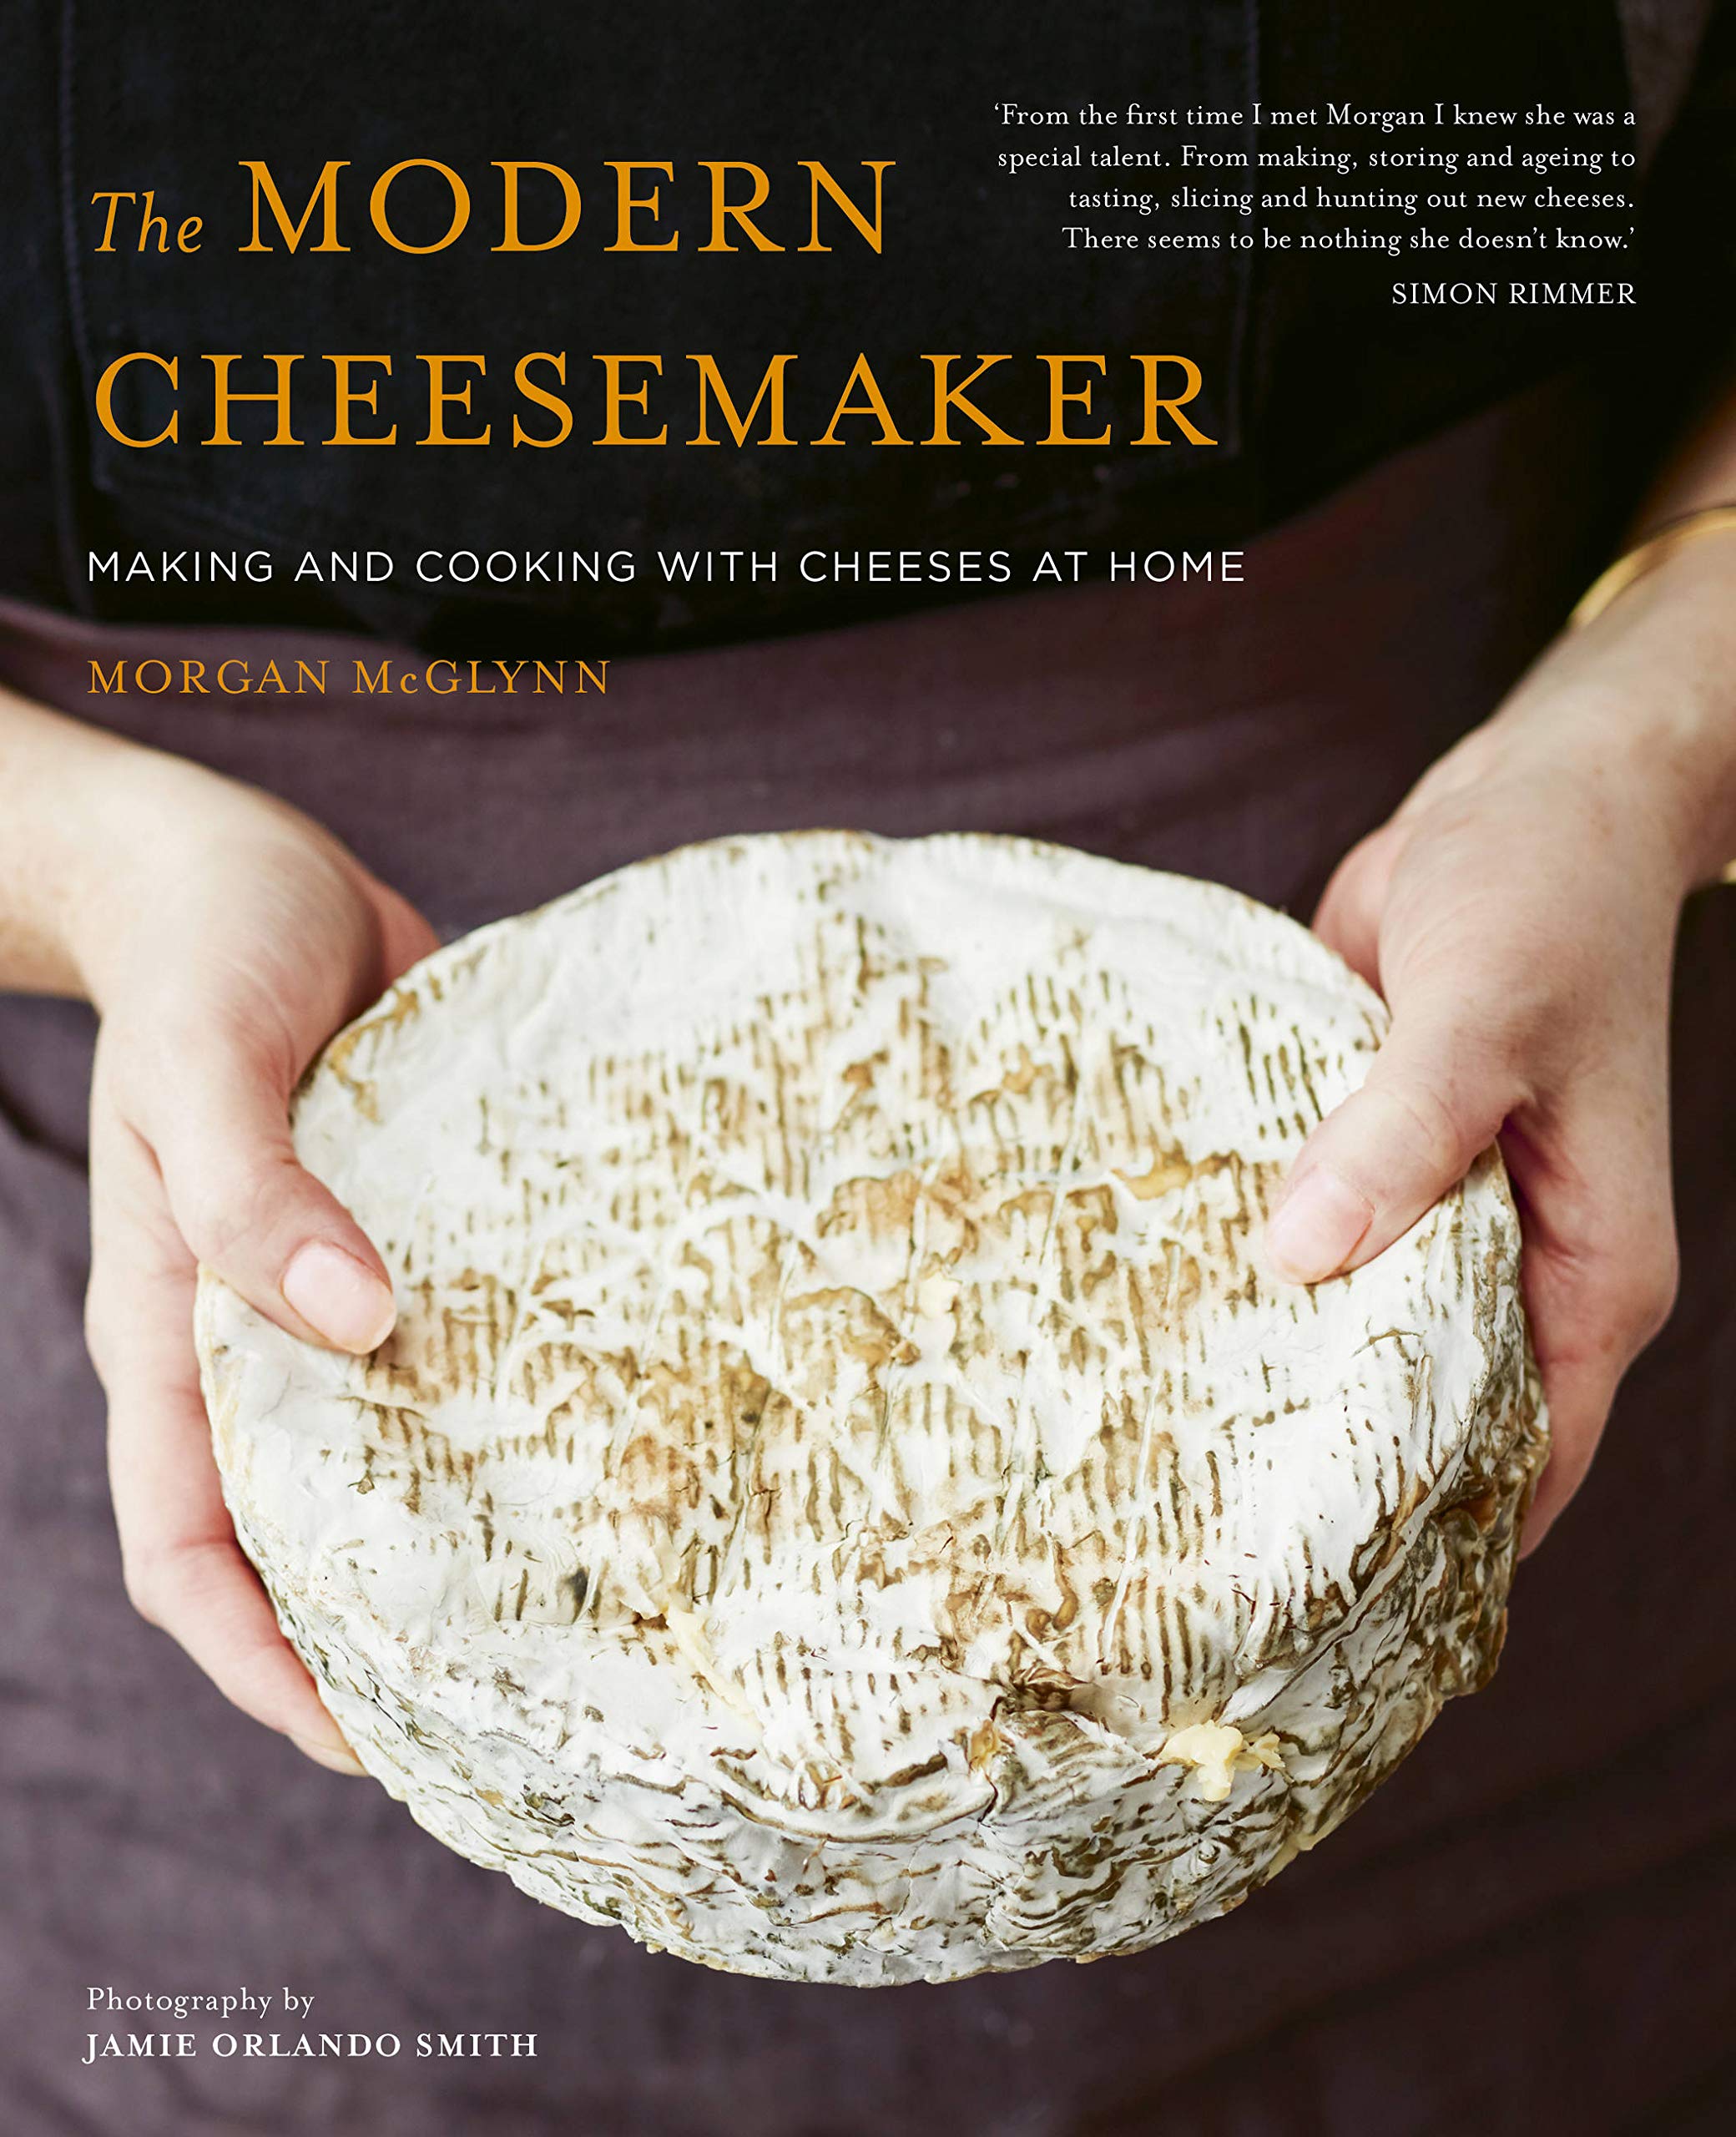 The Modern Cheesemaker: Making and Cooking with Cheeses at Home (Morgan McGlynn)